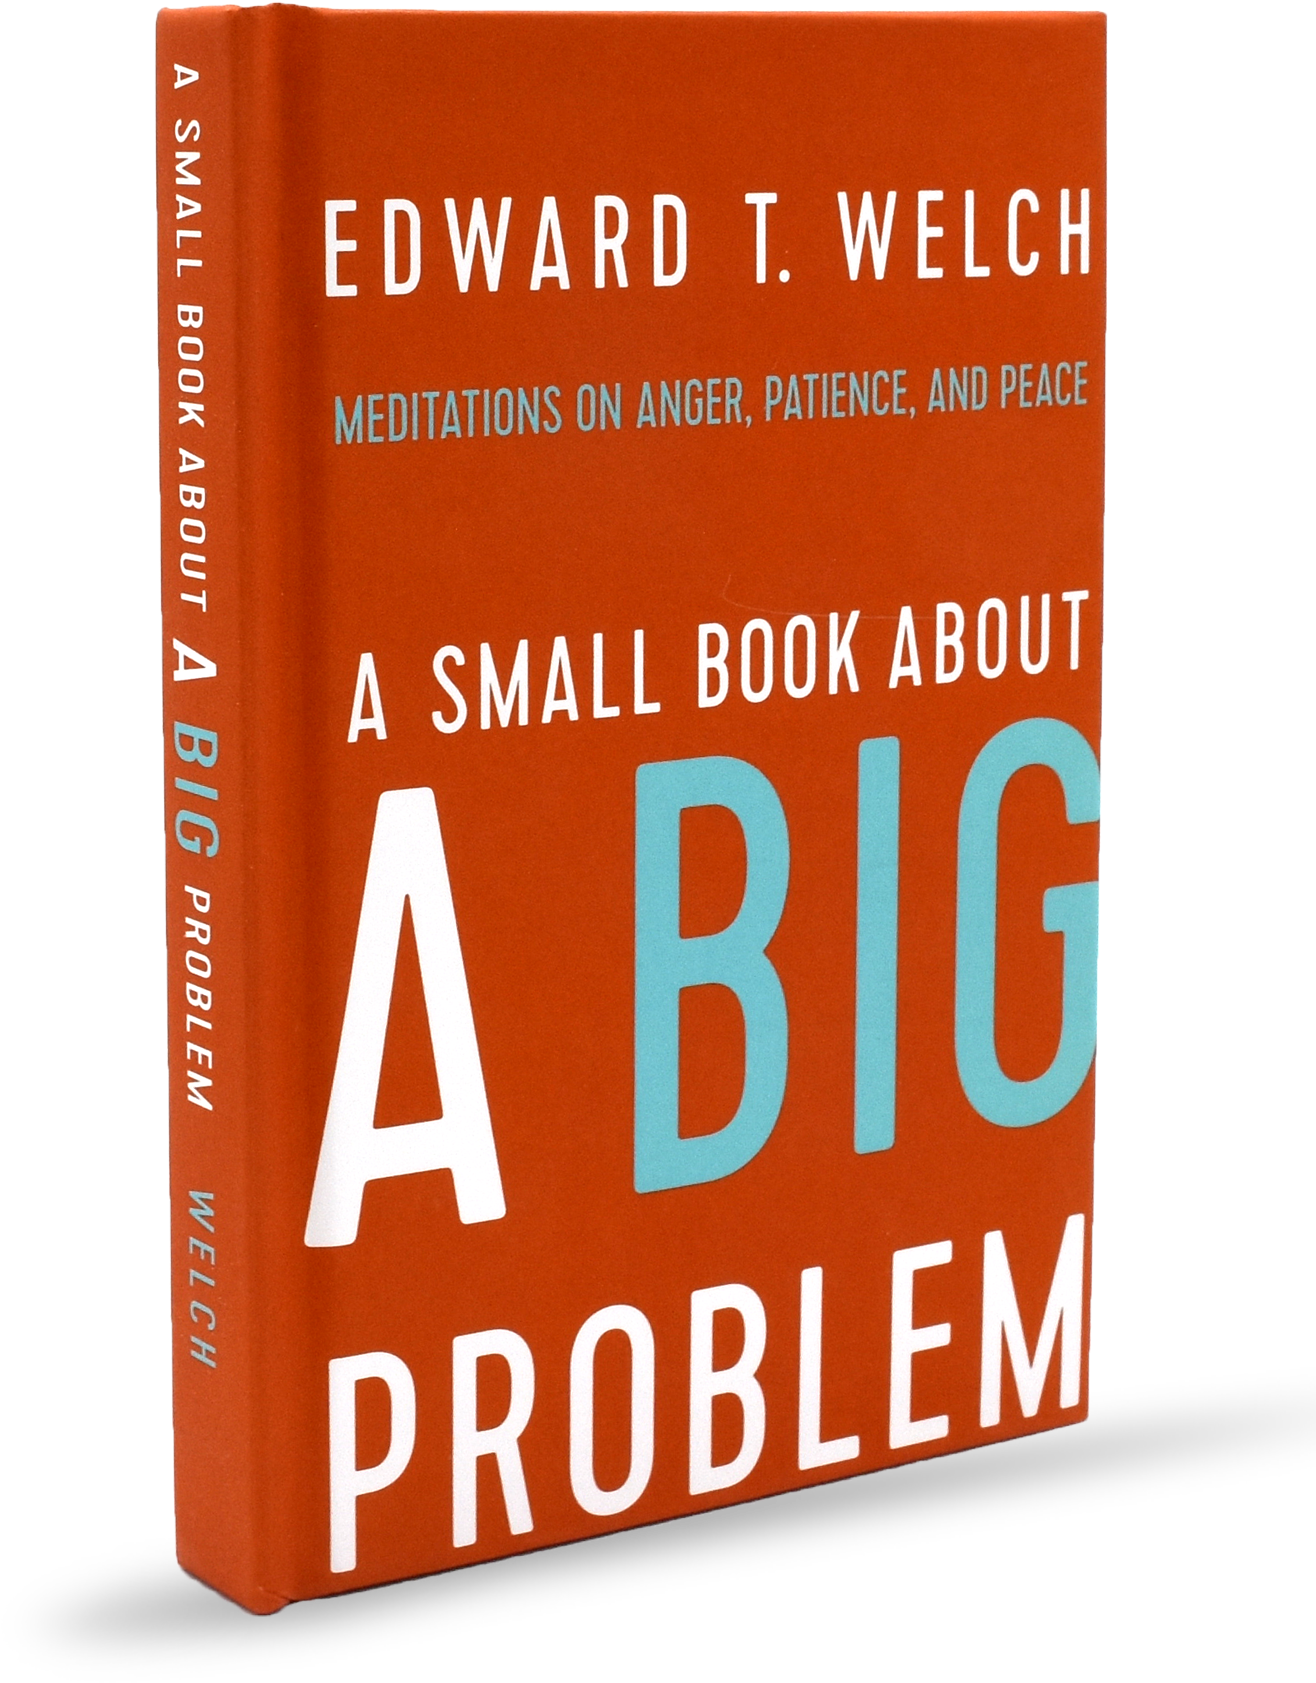 A Small Book About A Big Problem Cover